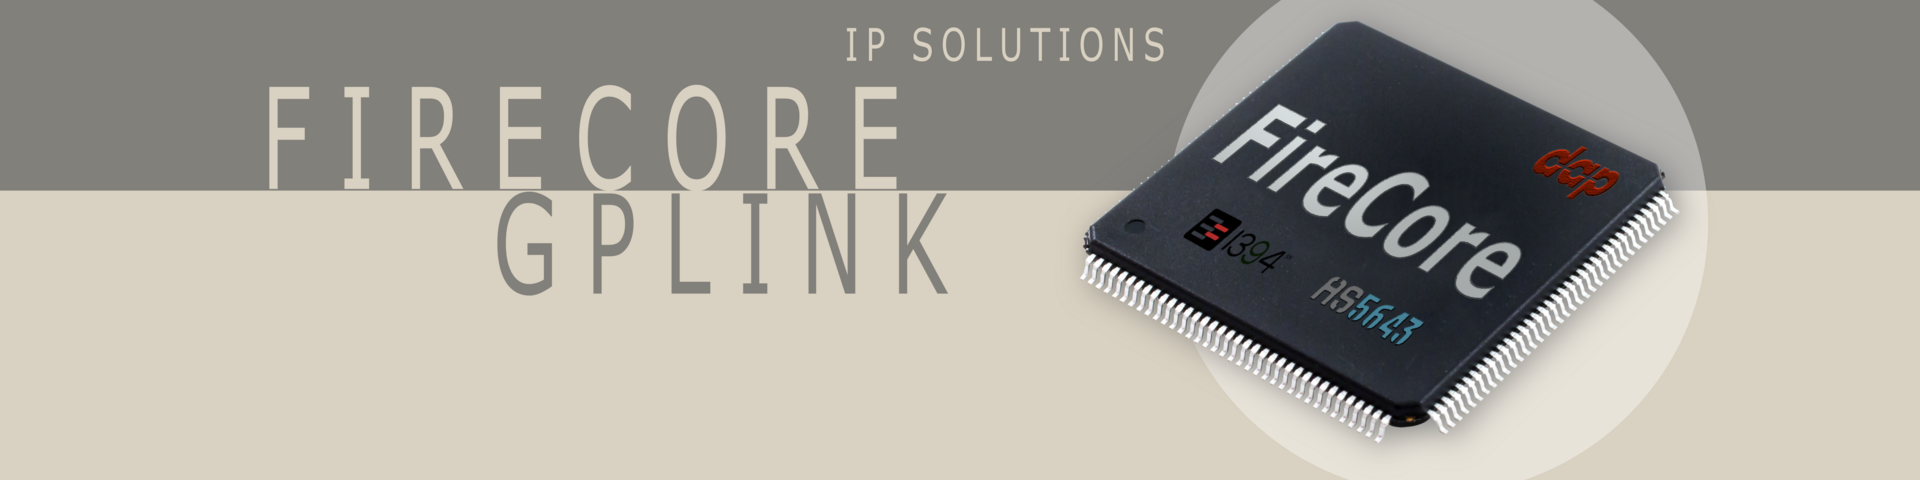 1394 and AS5643 IP Core solutions - FireCore GPLink